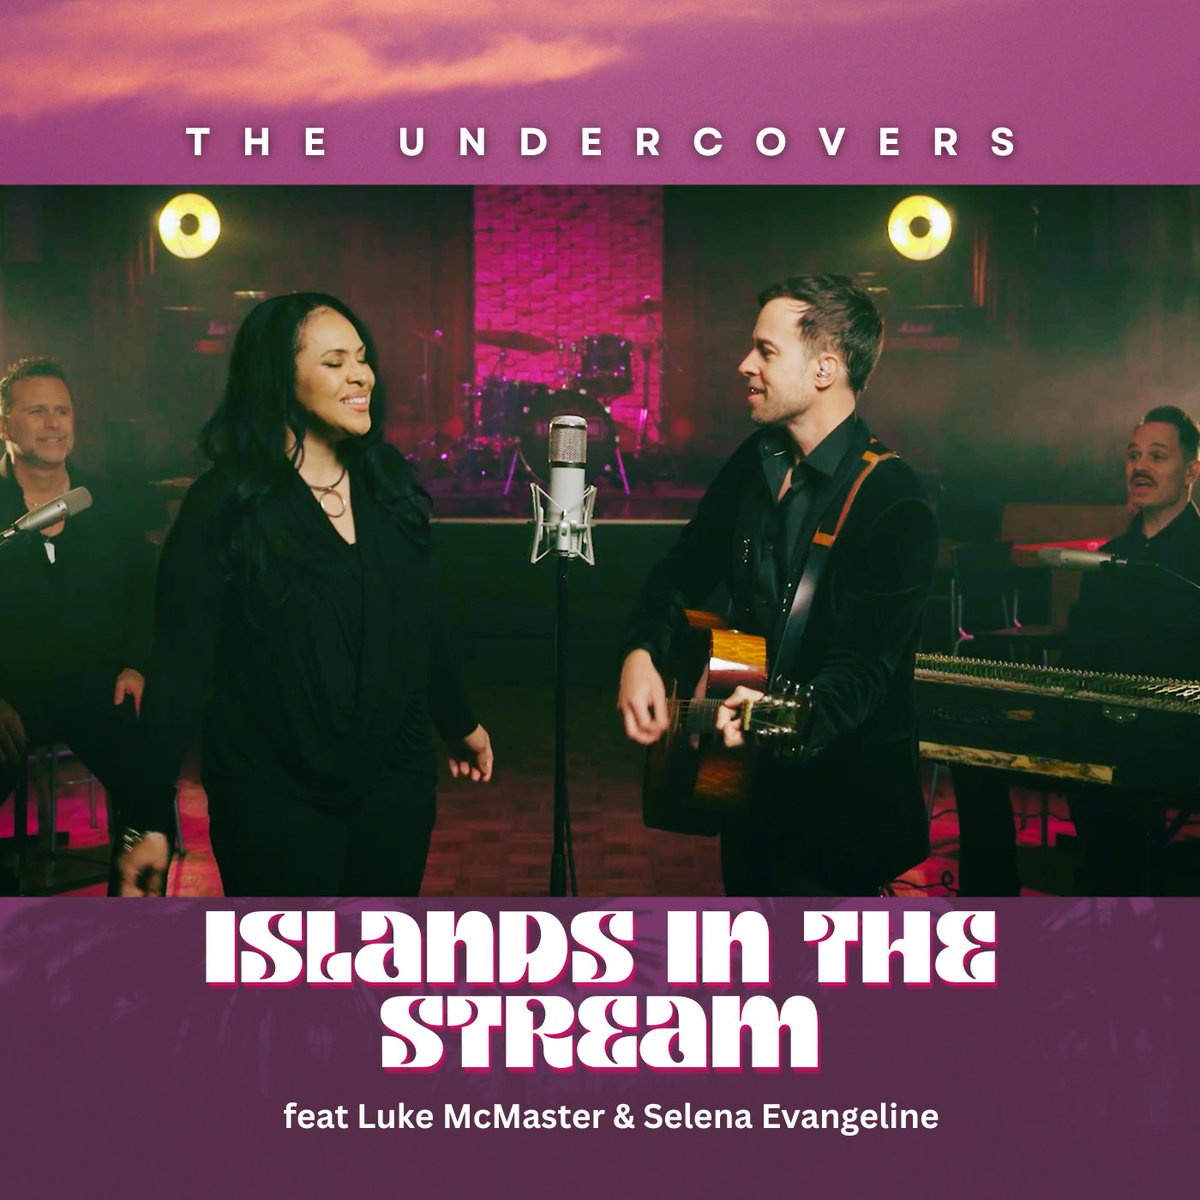 SAVE THE DATE!  Our first single as The Undercovers will be here on APRIL 19th!  Pre-save Islands In The Stream here: lnk.to/UnderIslands 

#lionelrichie #kennyrogers #smokeyrobinson #lukemcmaster #kevinpauls #joelparisien #theundercovers #islandsinthestream #newmusicfriday